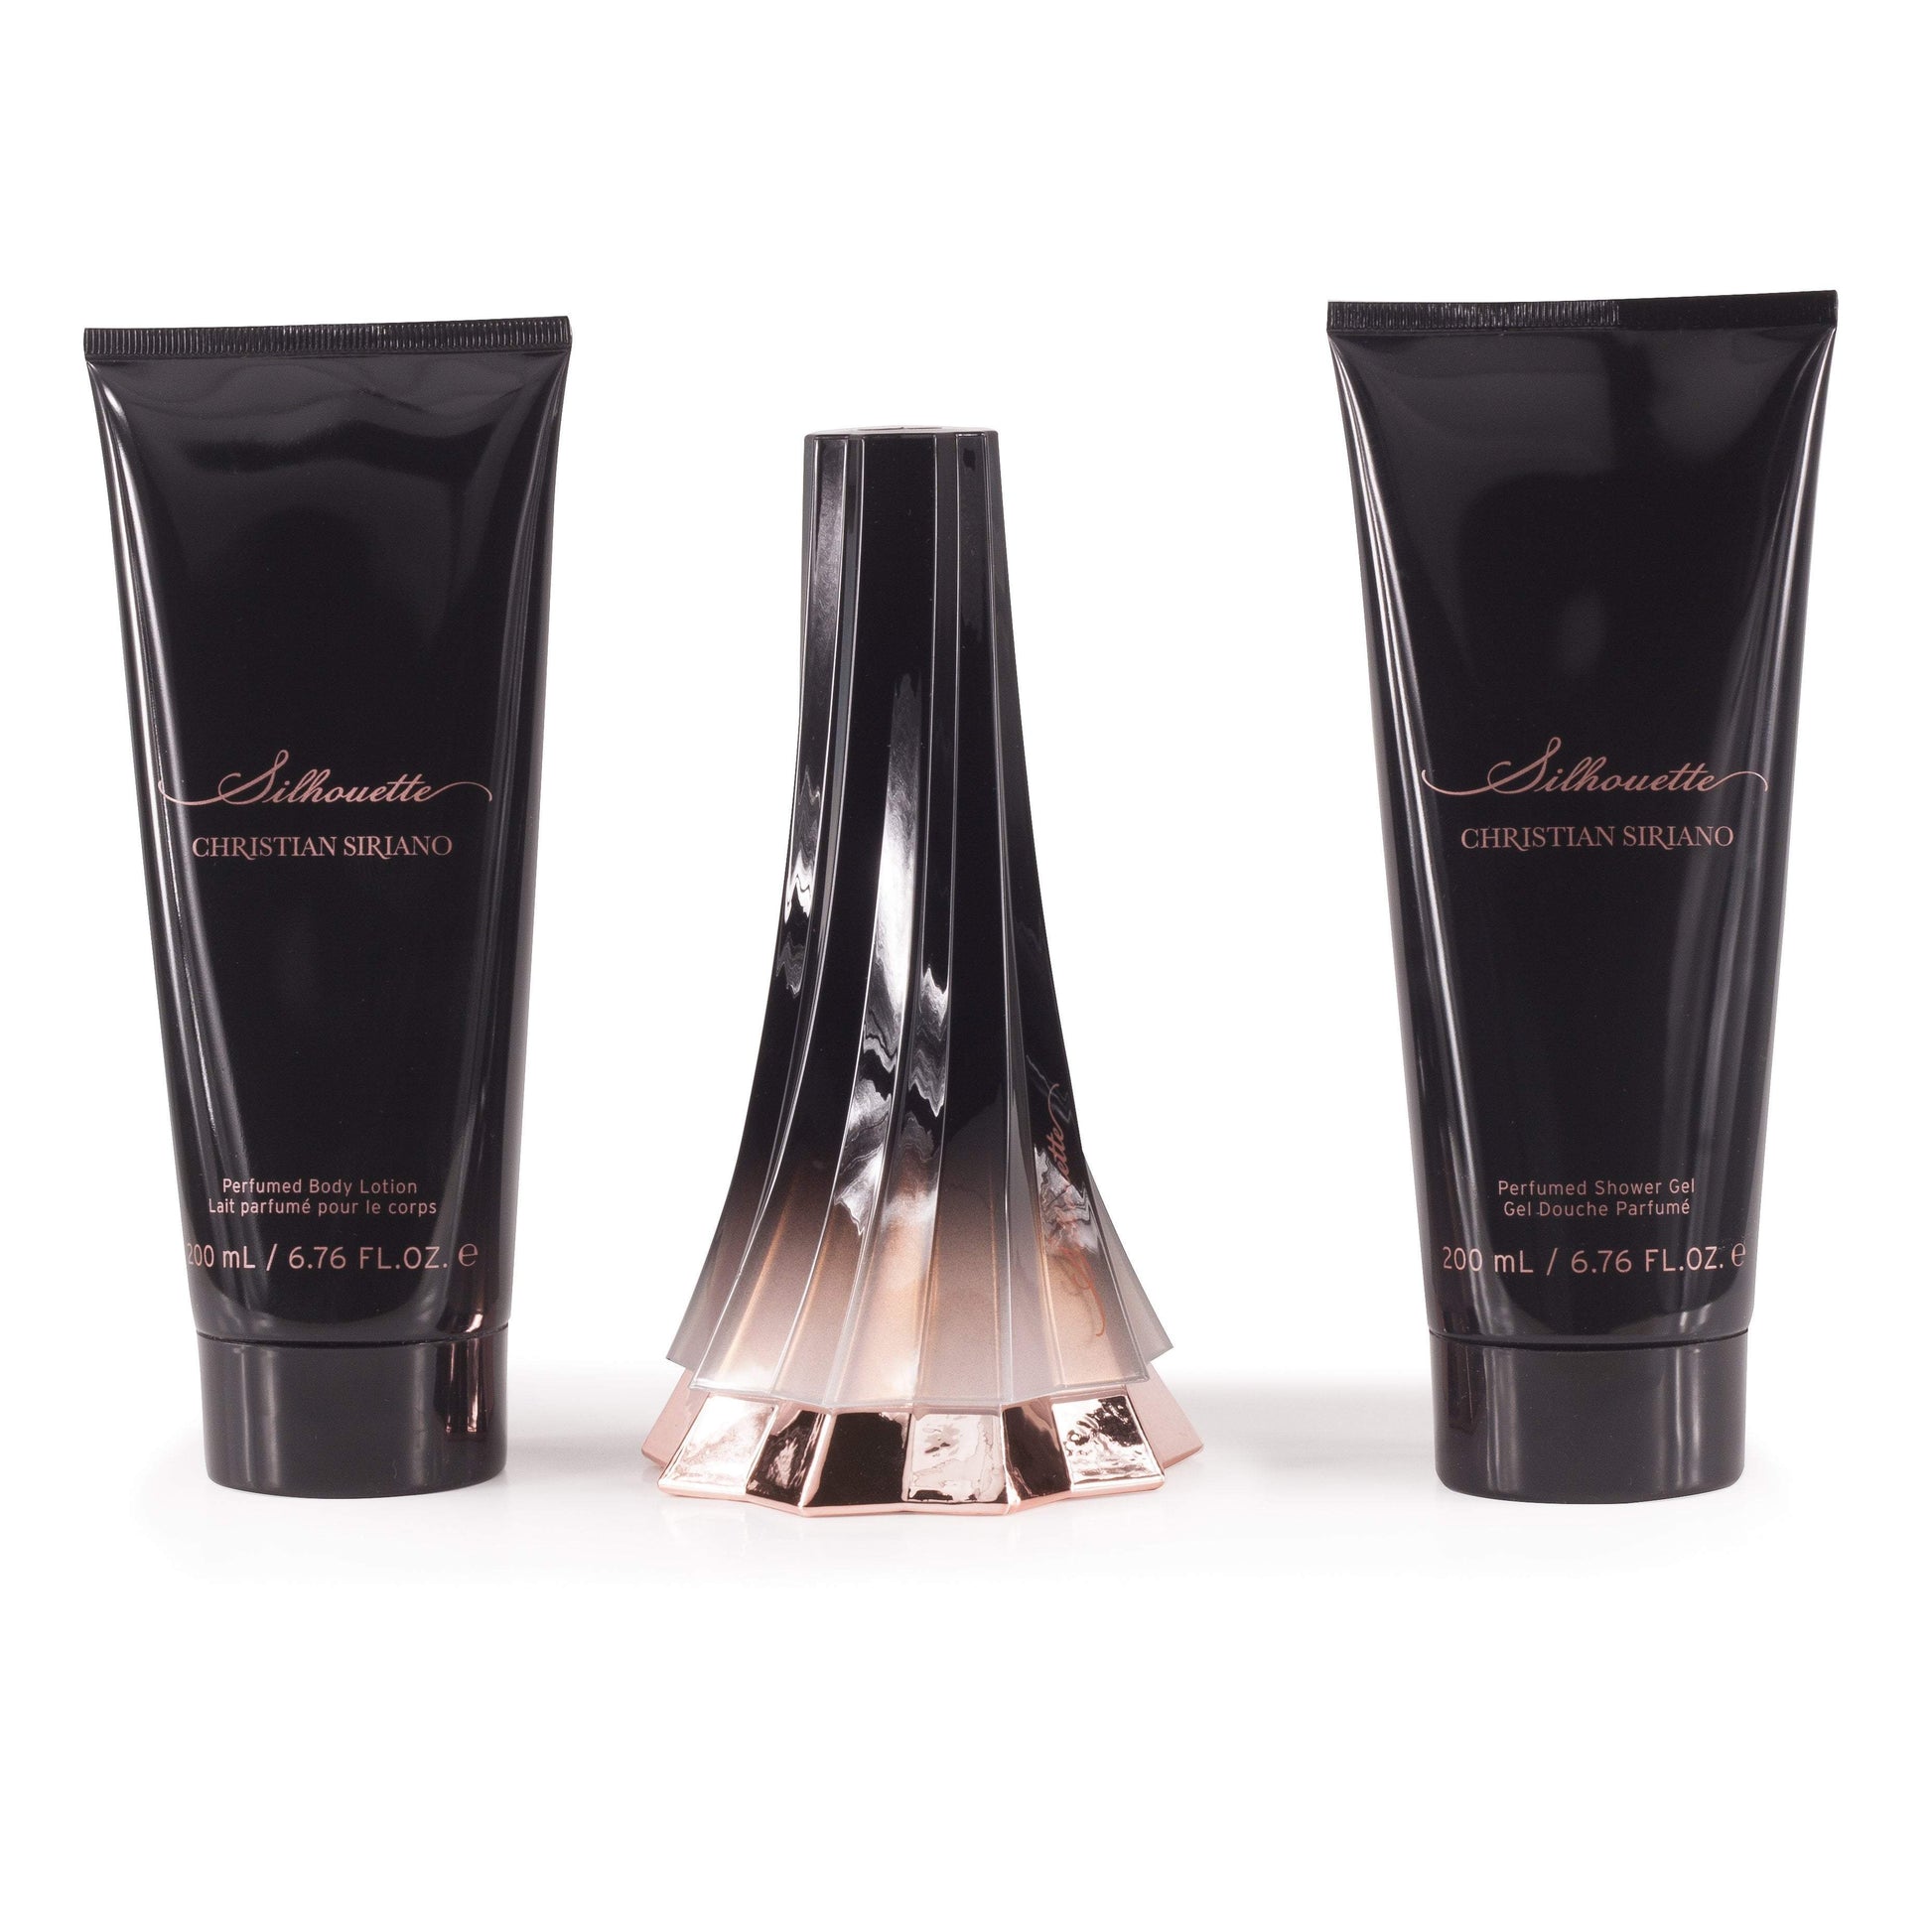 Silhouette Set for Women by Christian Siriano, Product image 1